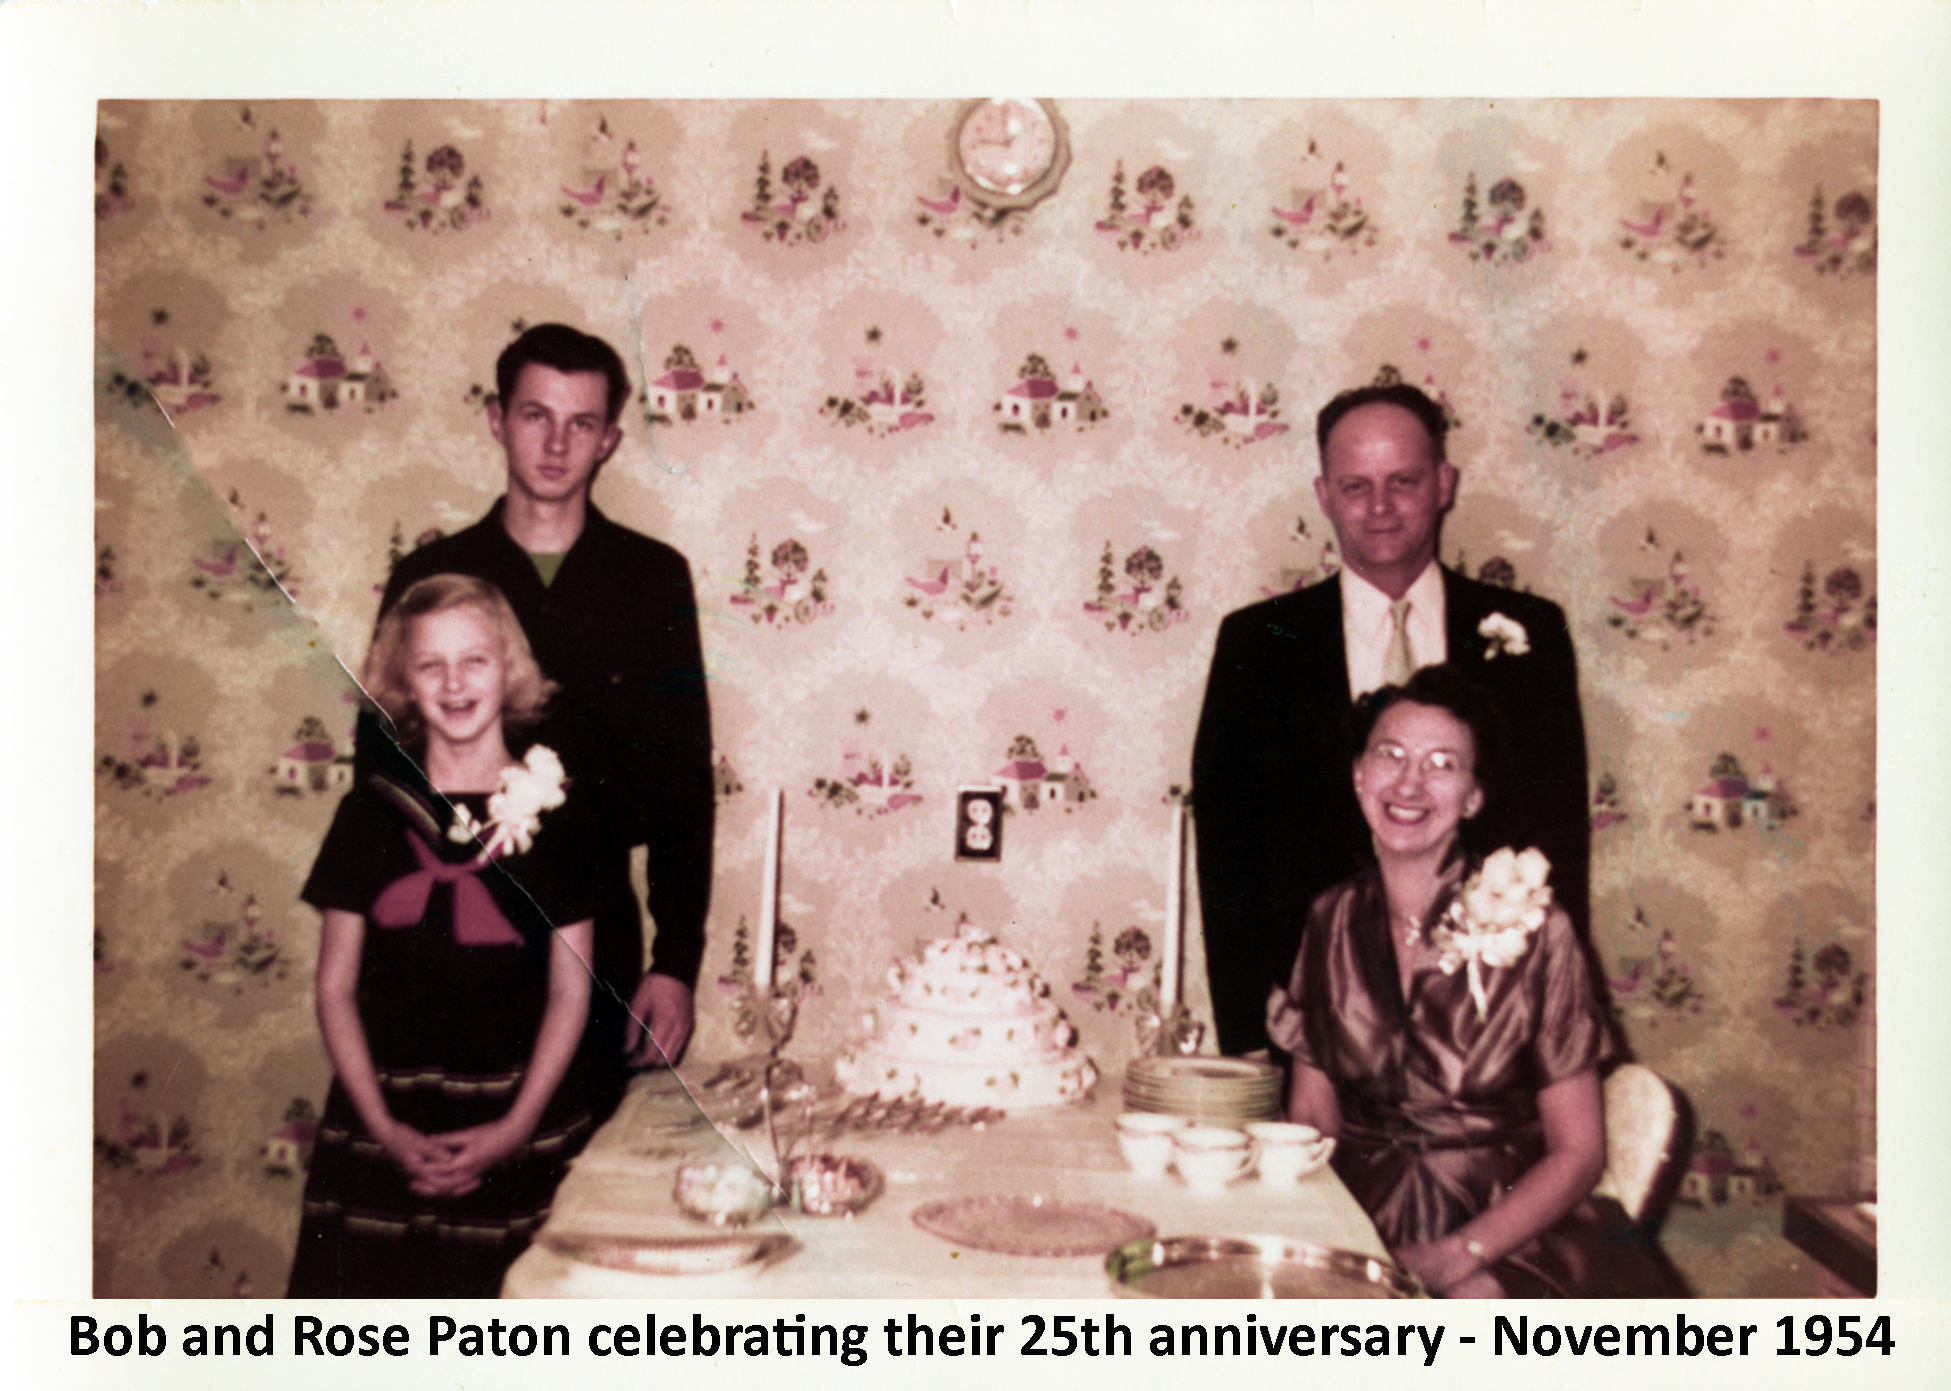 The Paton family is dressed nicely. Gail and Rose are seated at a table
          with a fancy cake on it and Guy and Robert are standing in behind them.